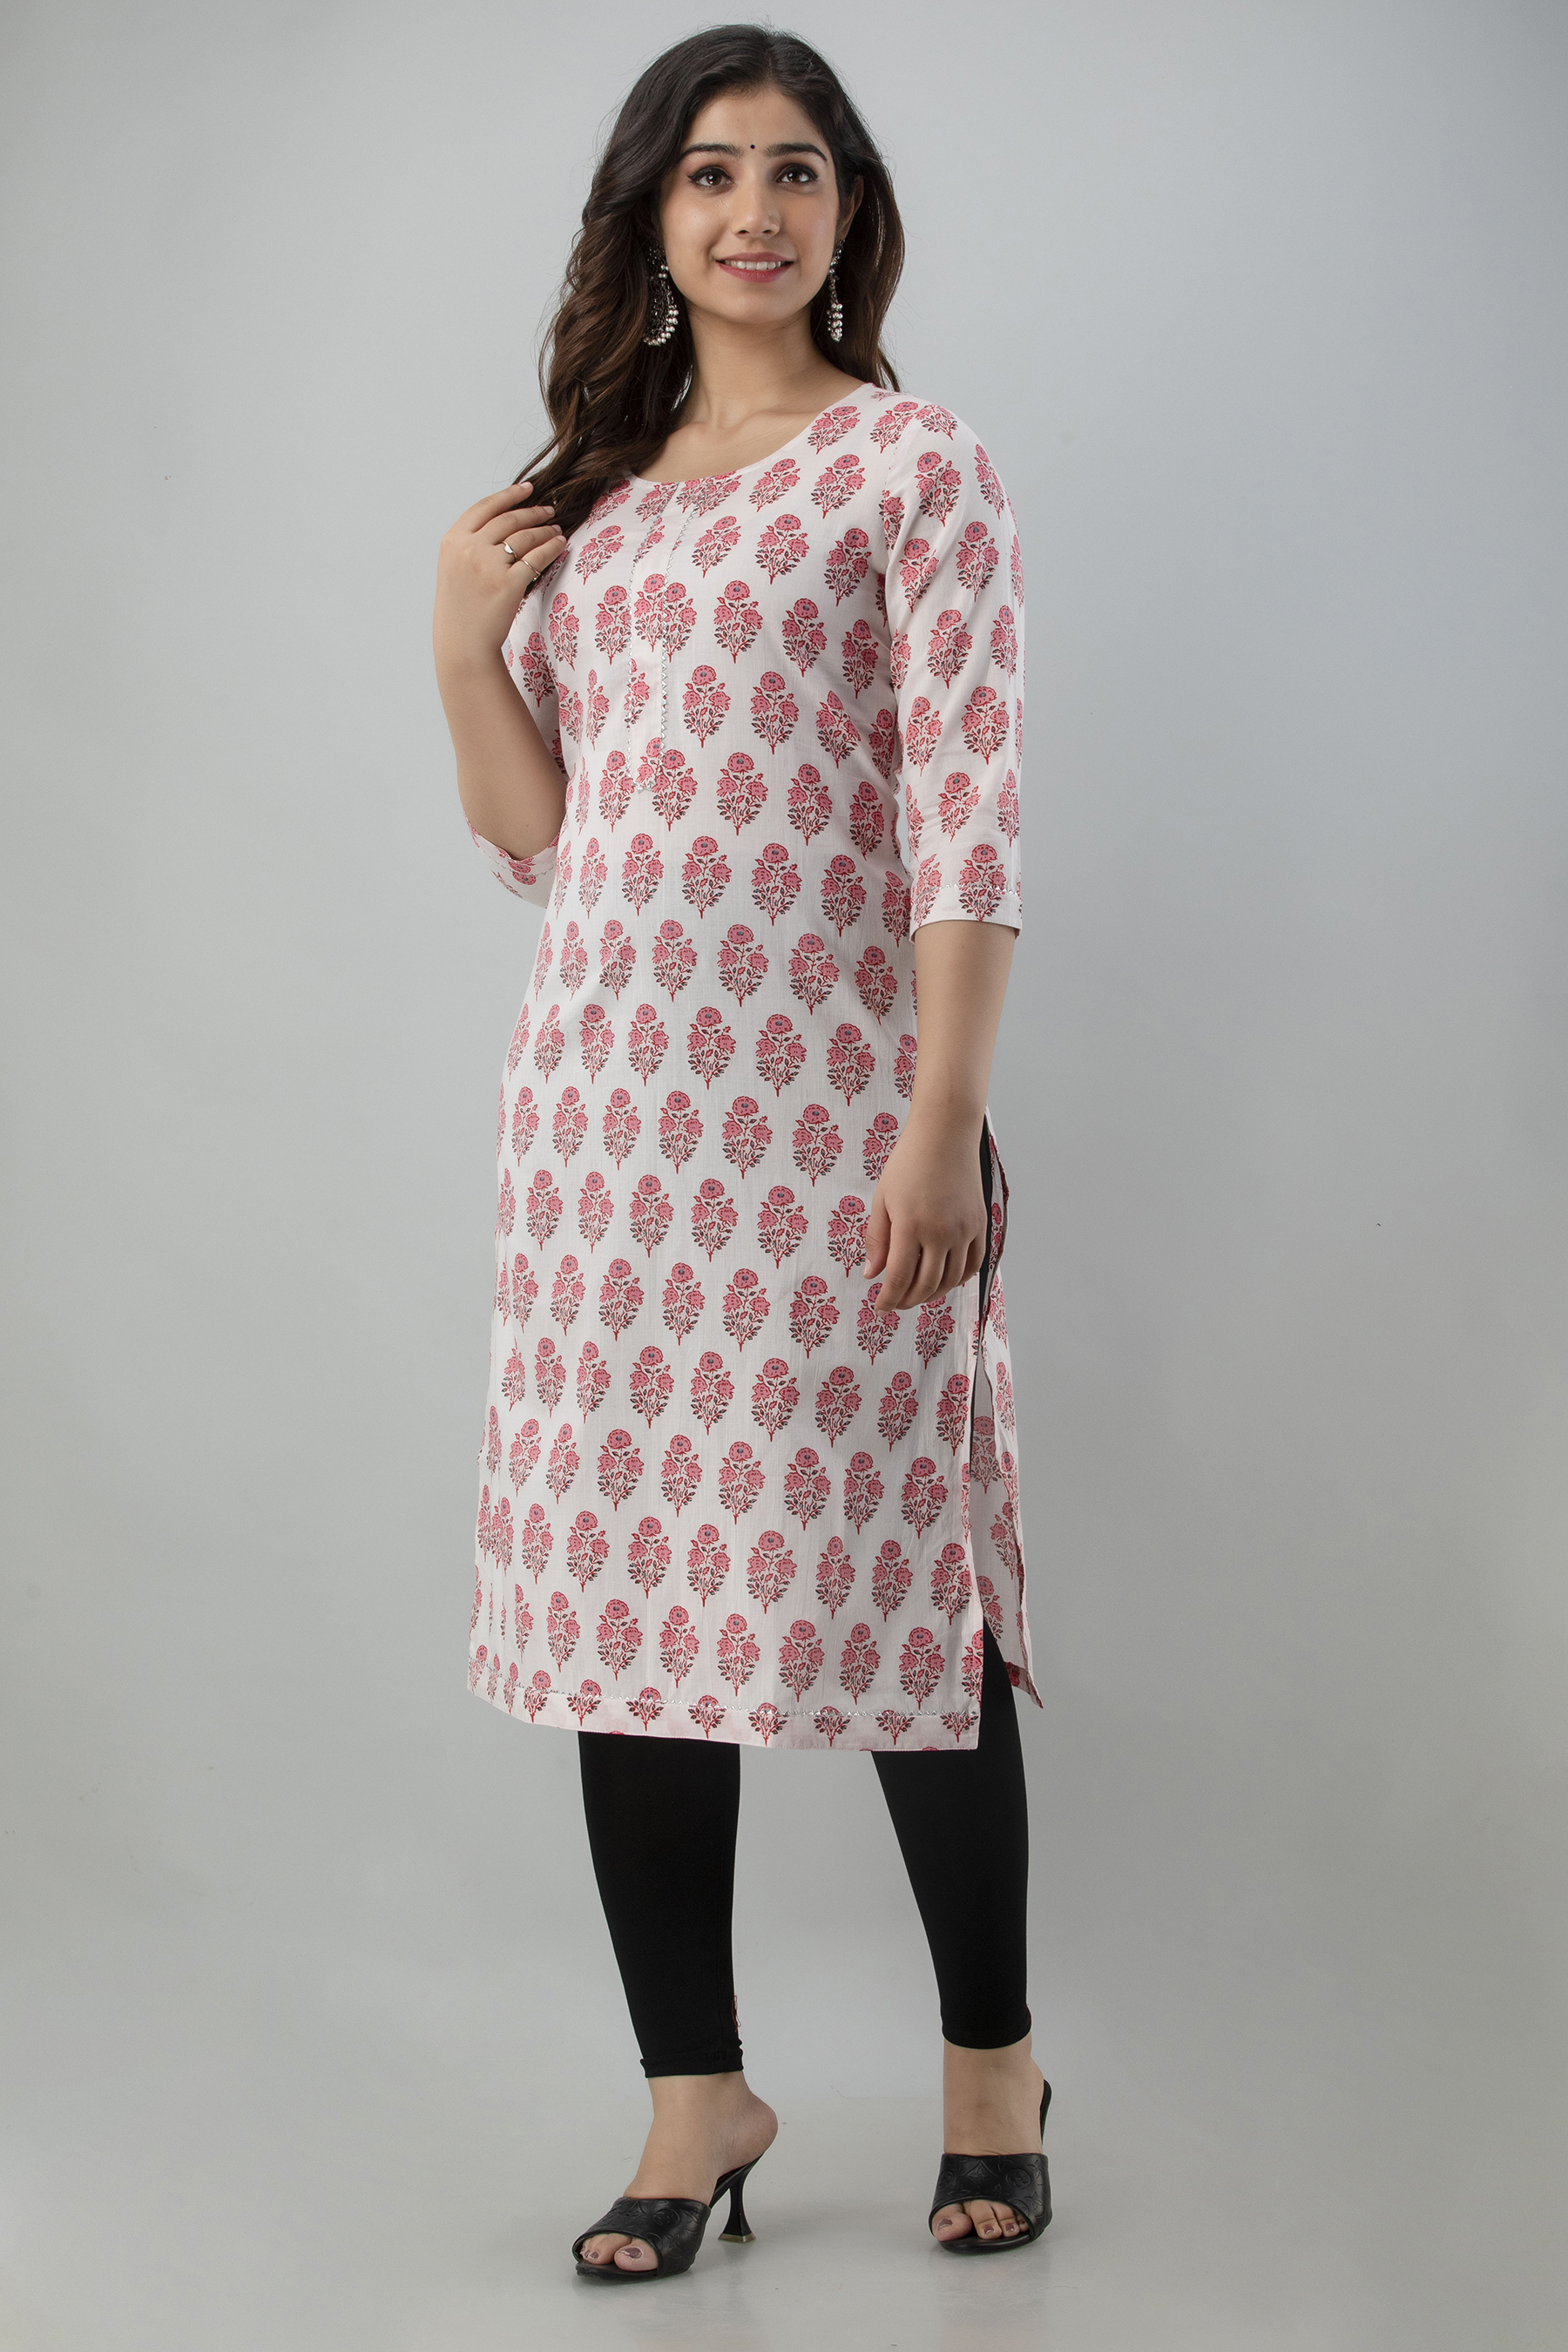 Embroidered Rayon Kurtas For Women at Best Price From Soch - Earth  Embroidered Straight Rayon Kurta With Gota Patti